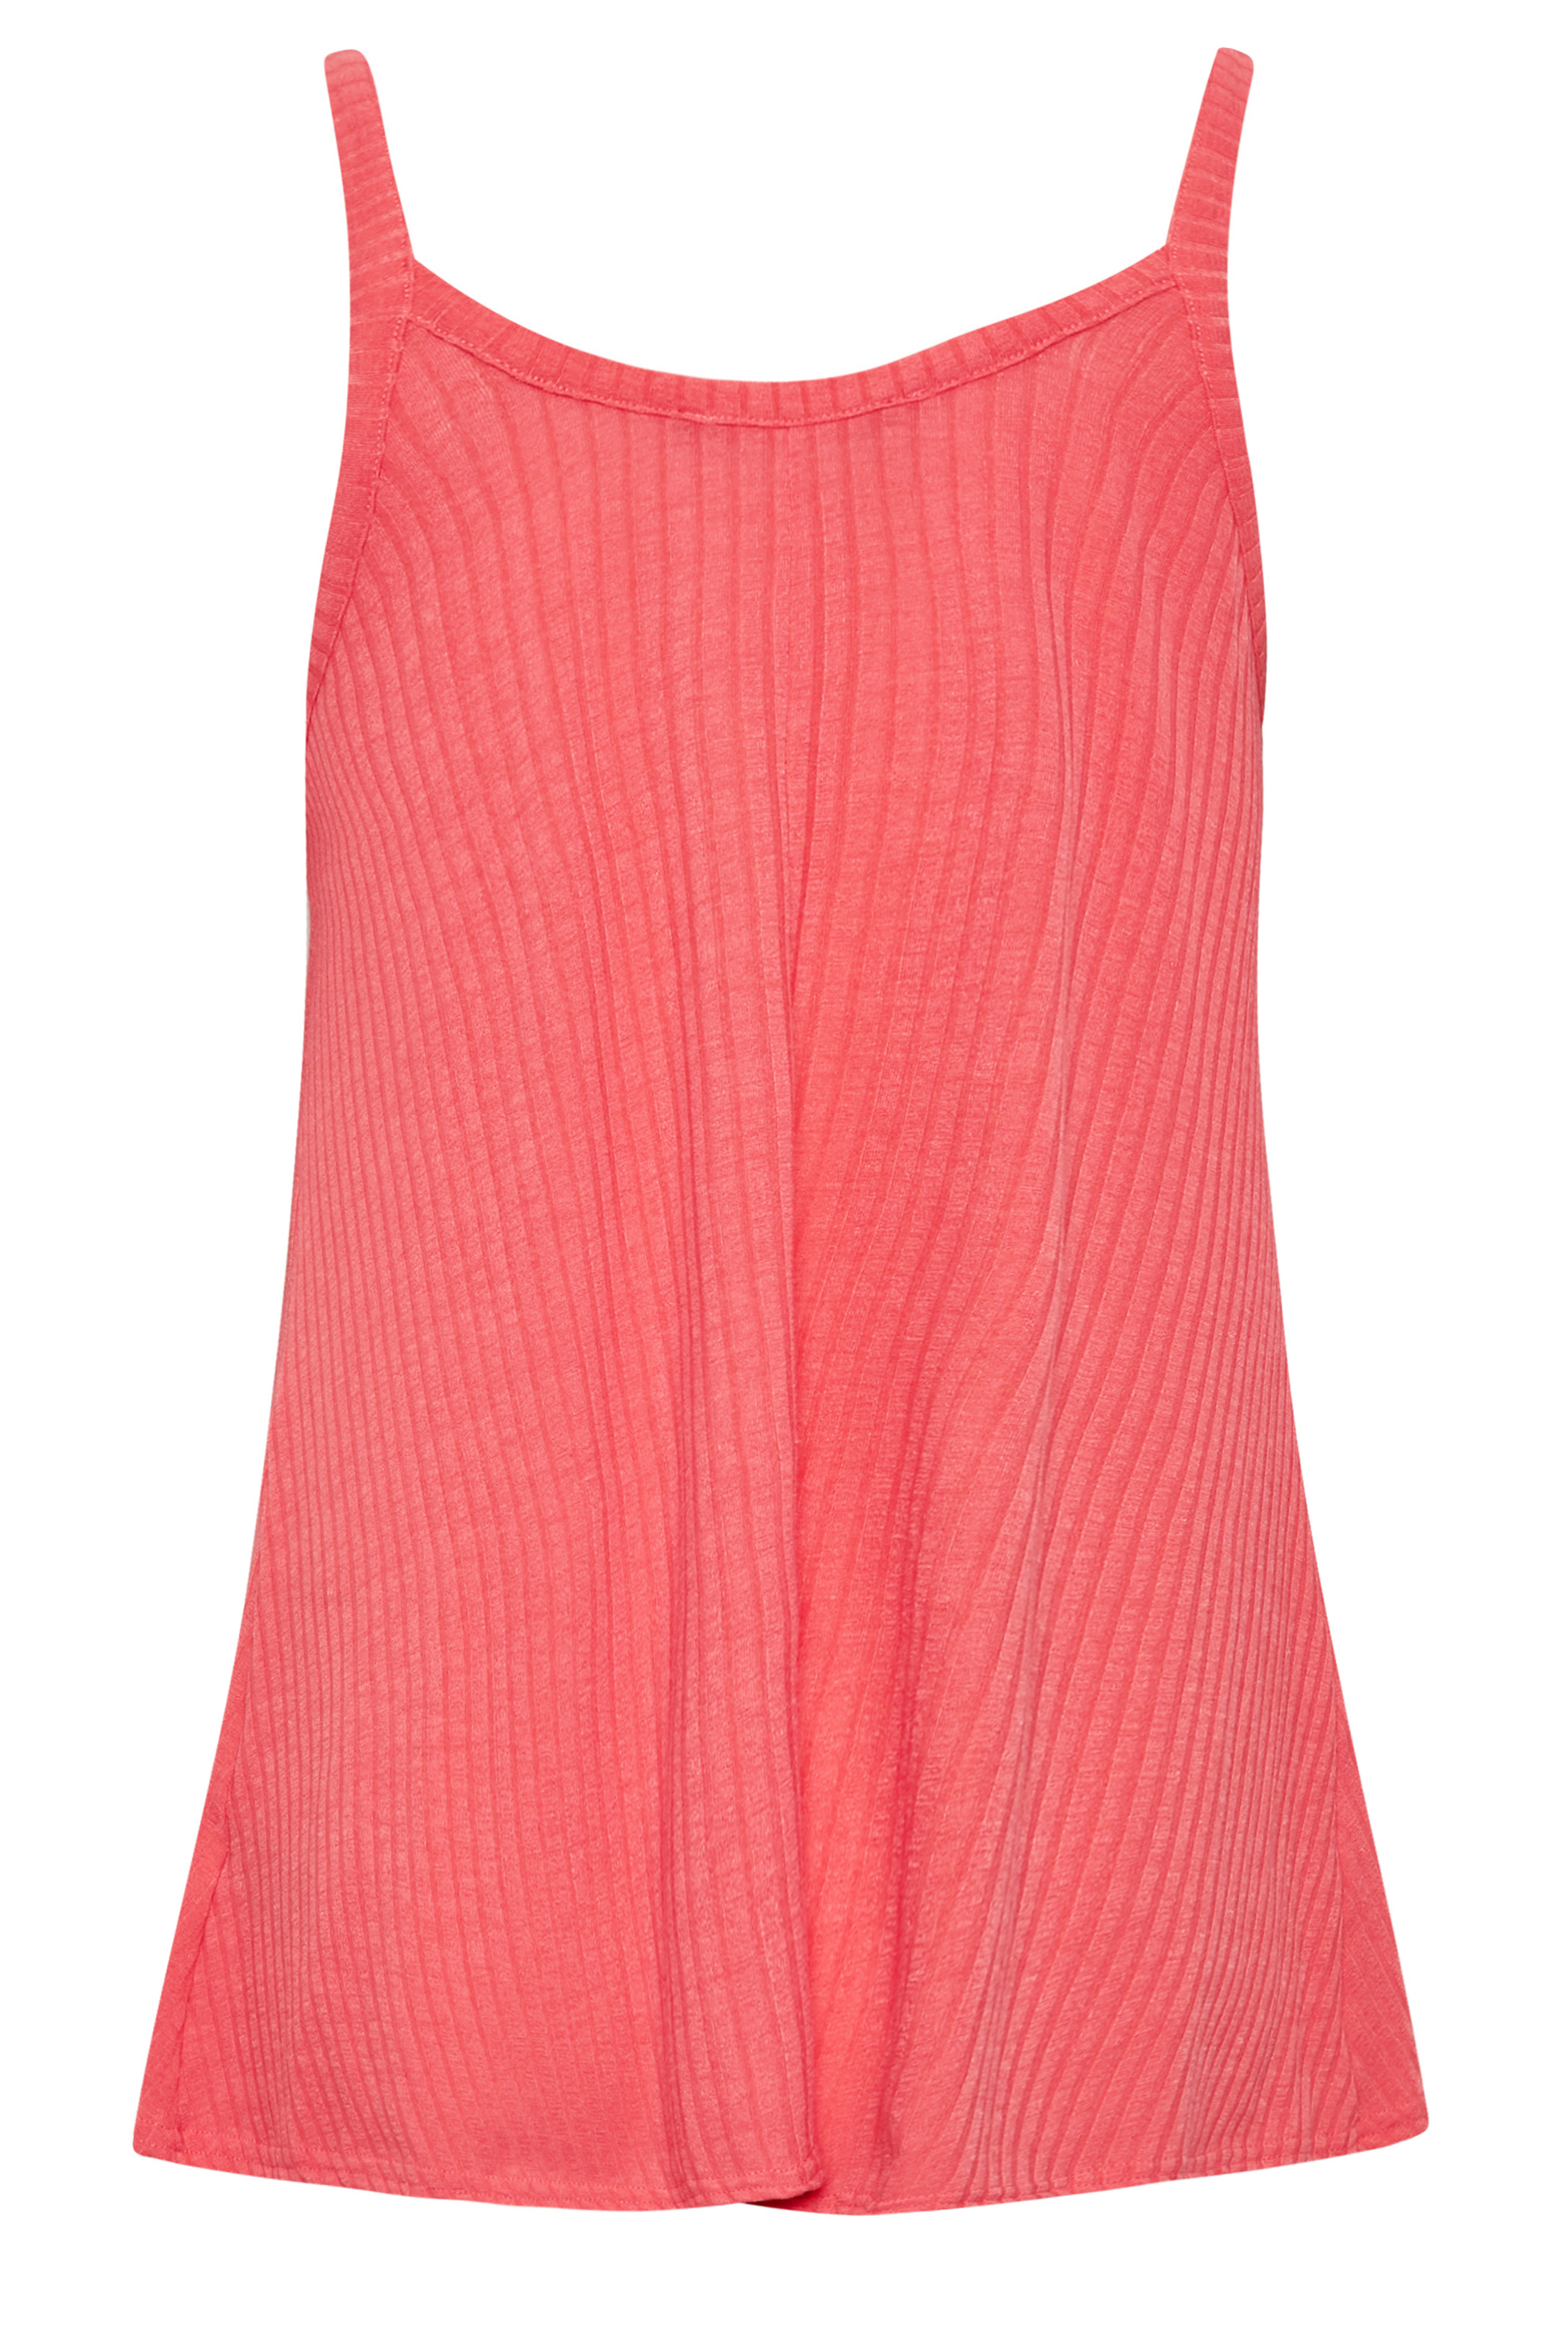 LIMITED COLLECTION Plus Size Hot Pink Button Down Cami Top | Yours Clothing